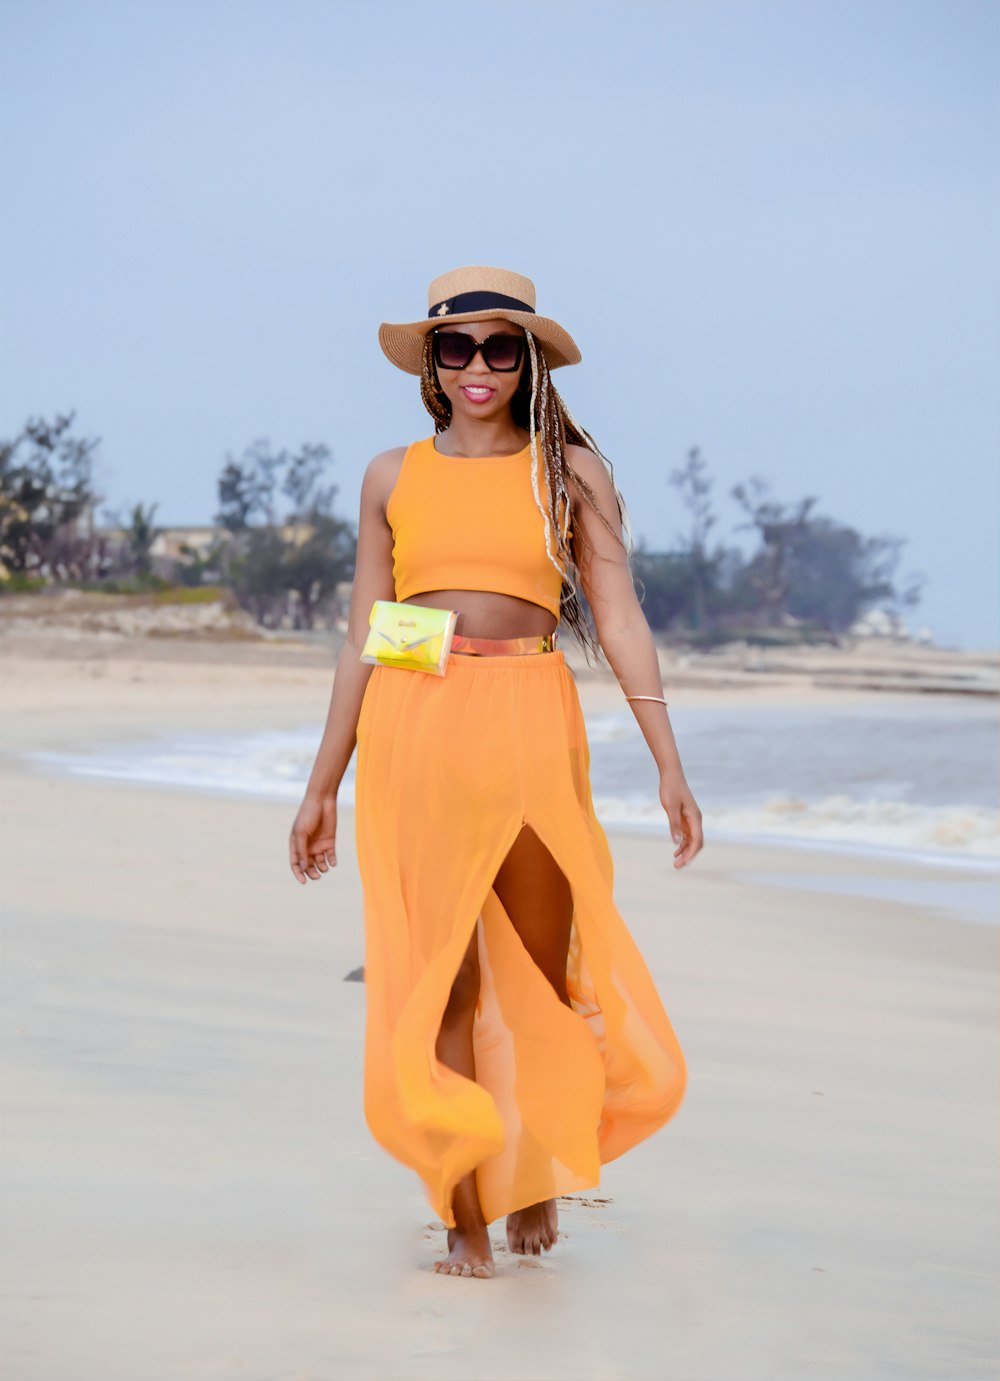 woman in yellow spaghetti strap dress wearing brown sun hat standing on beach during daytime